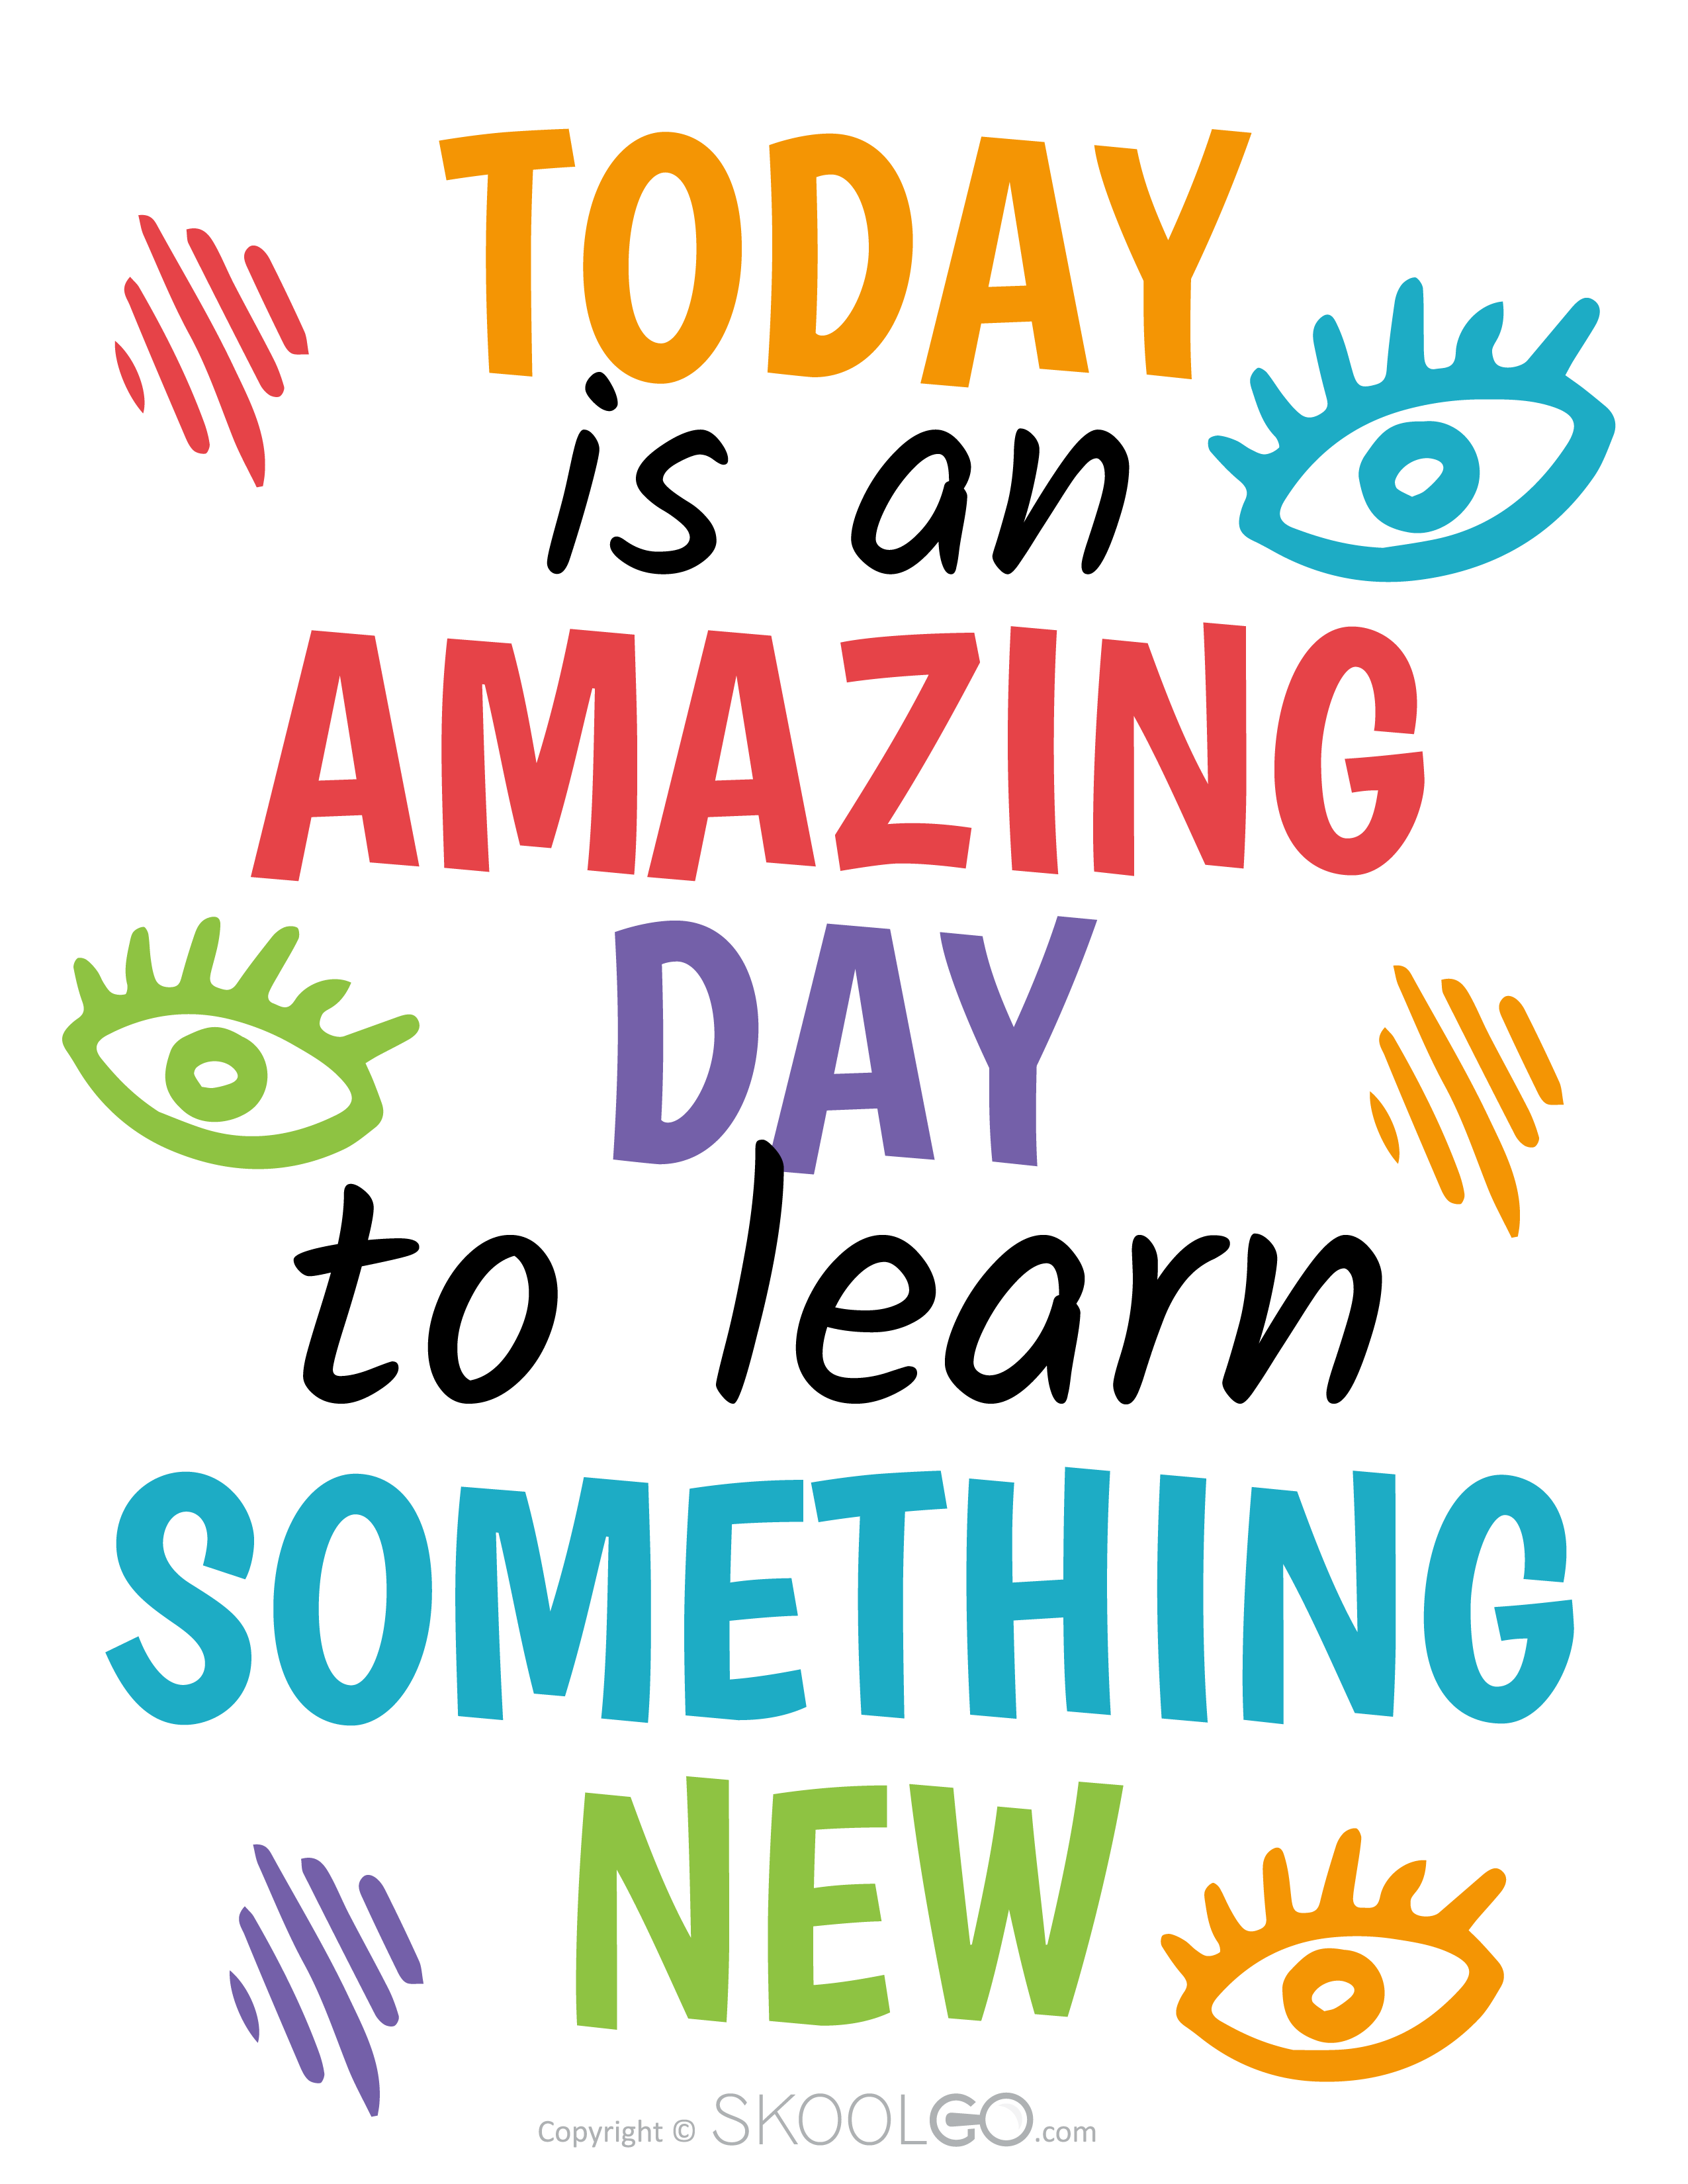 Today Is An Amazing Day To Learn Something New - Free Poster